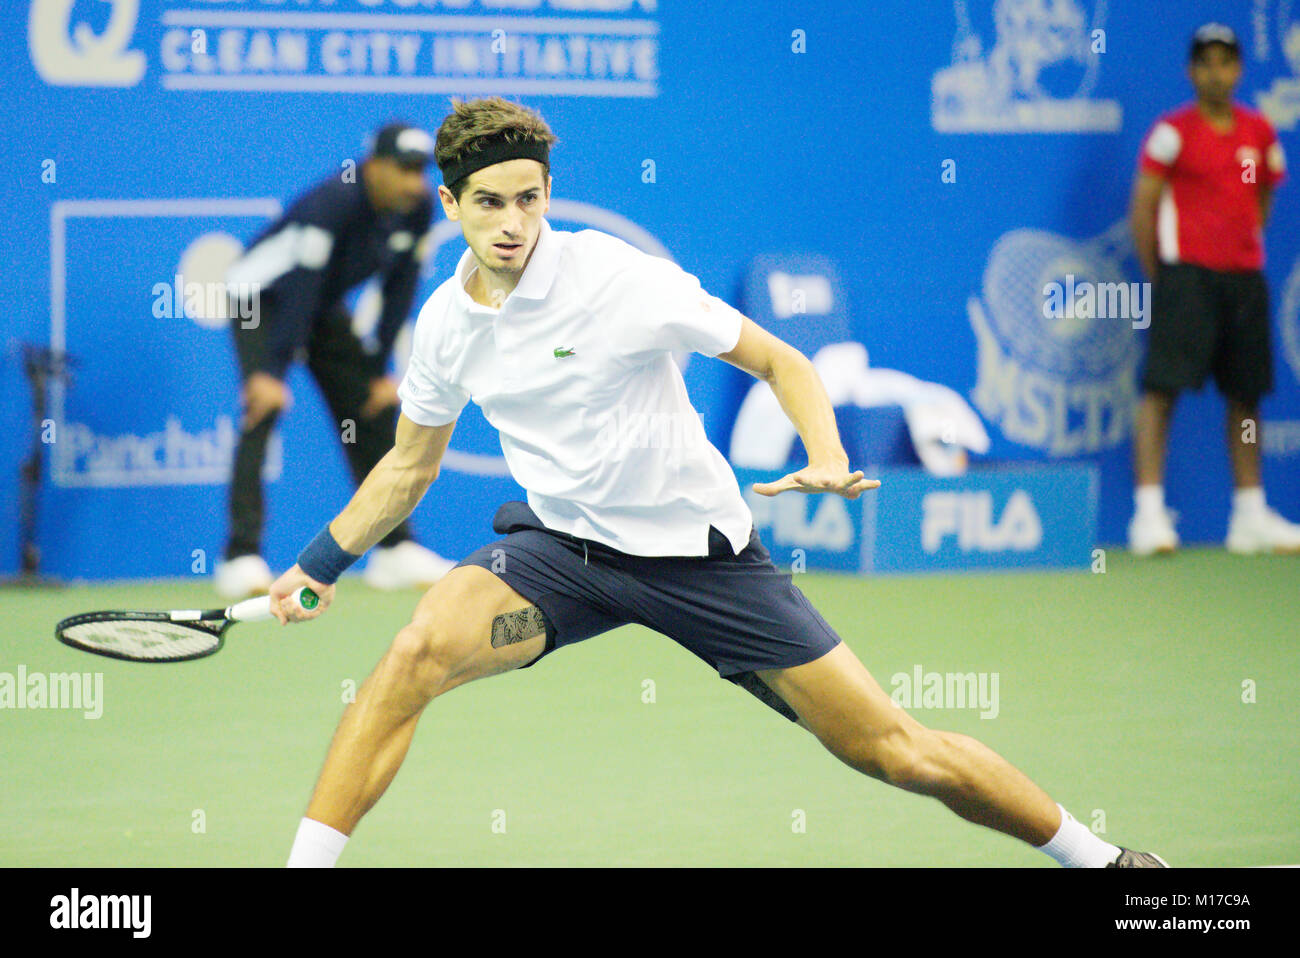 Pune, India. 4th January 2018. Pierre-Hugues Herbert of France, in action  in a quarter-final match of Tata Open Maharashtra Tennis tournament Stock  Photo - Alamy